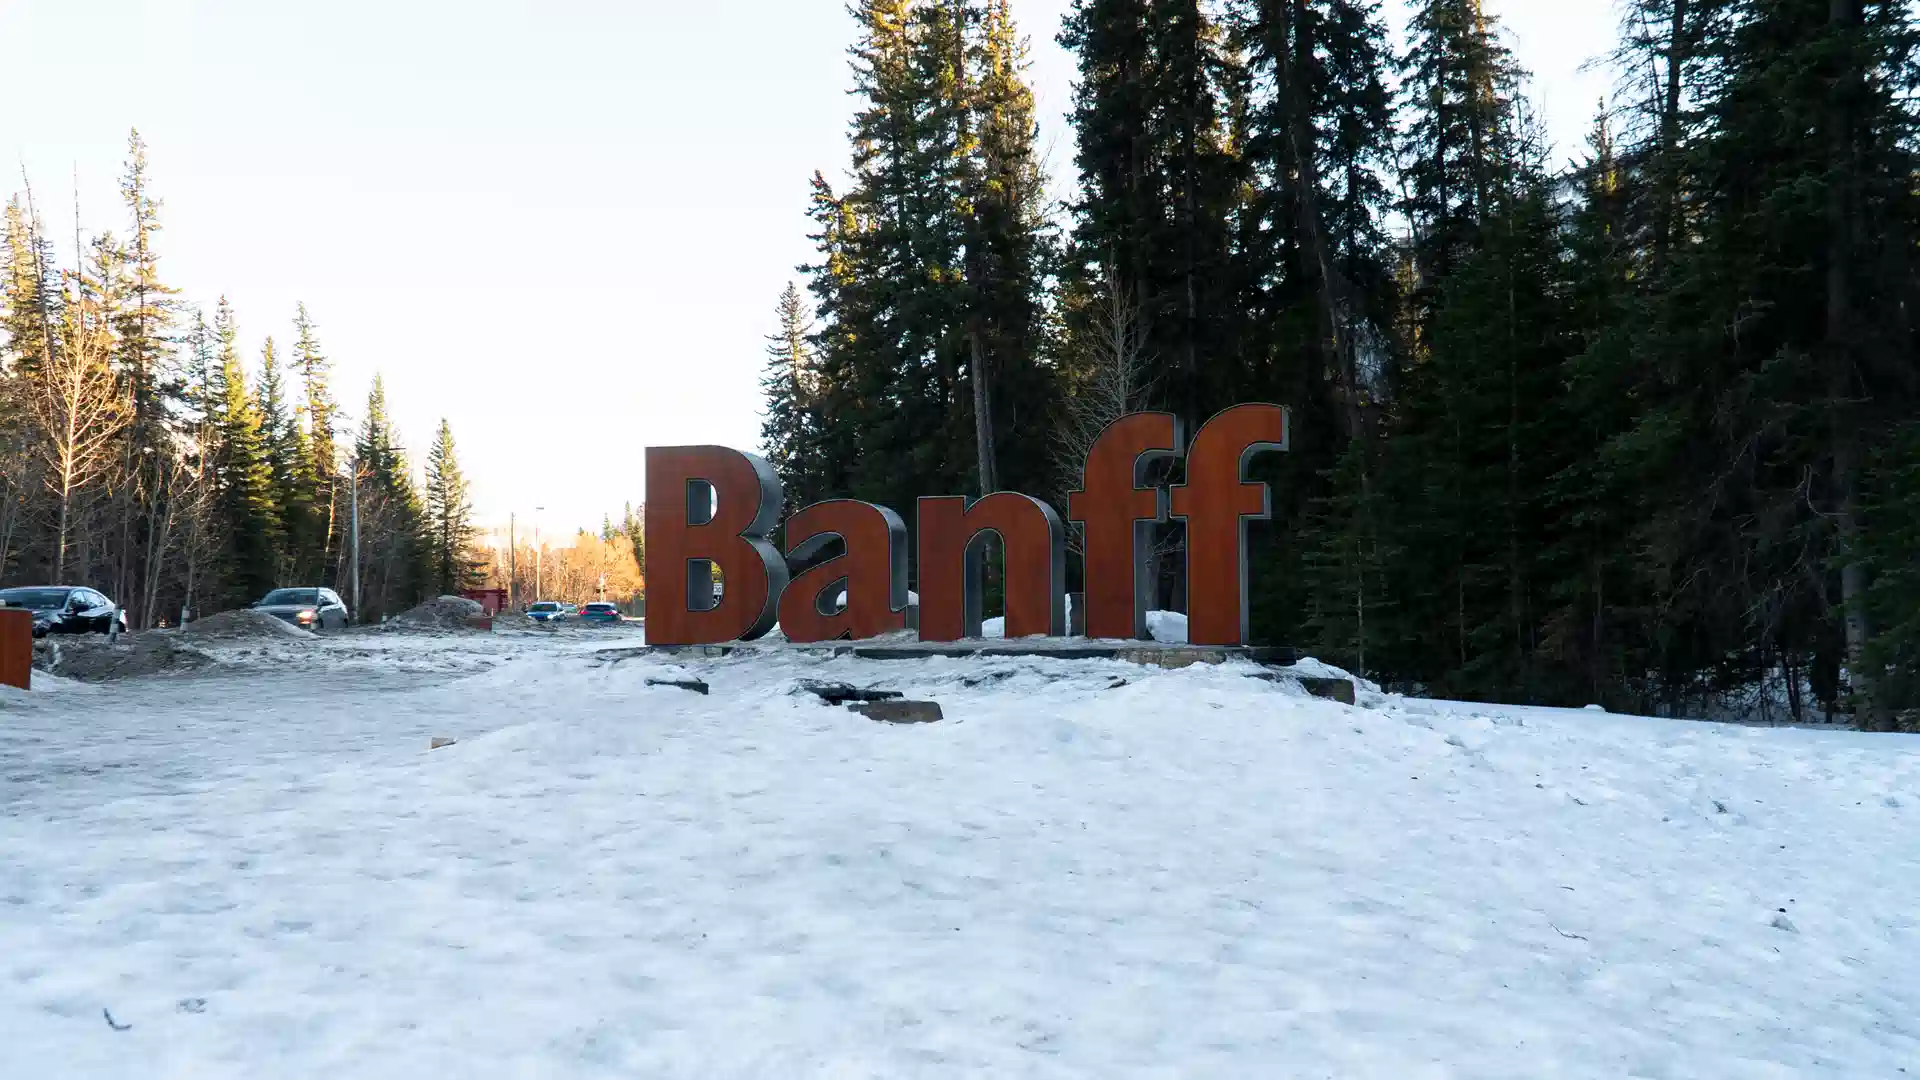 Welcome to banff image